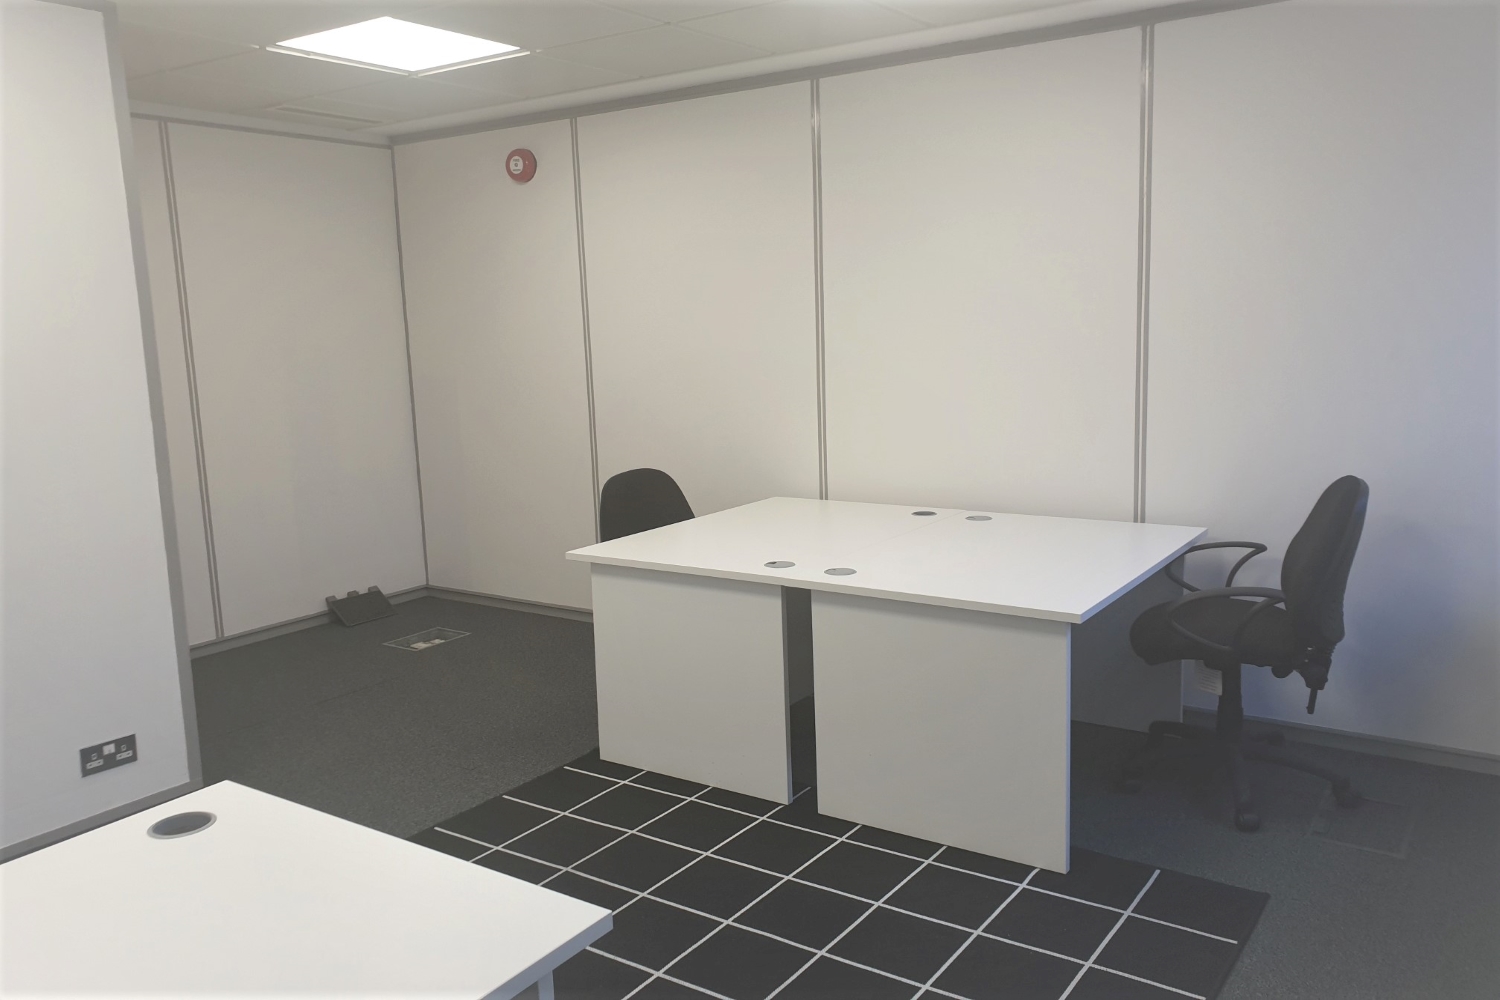 Office space near Stratford Station